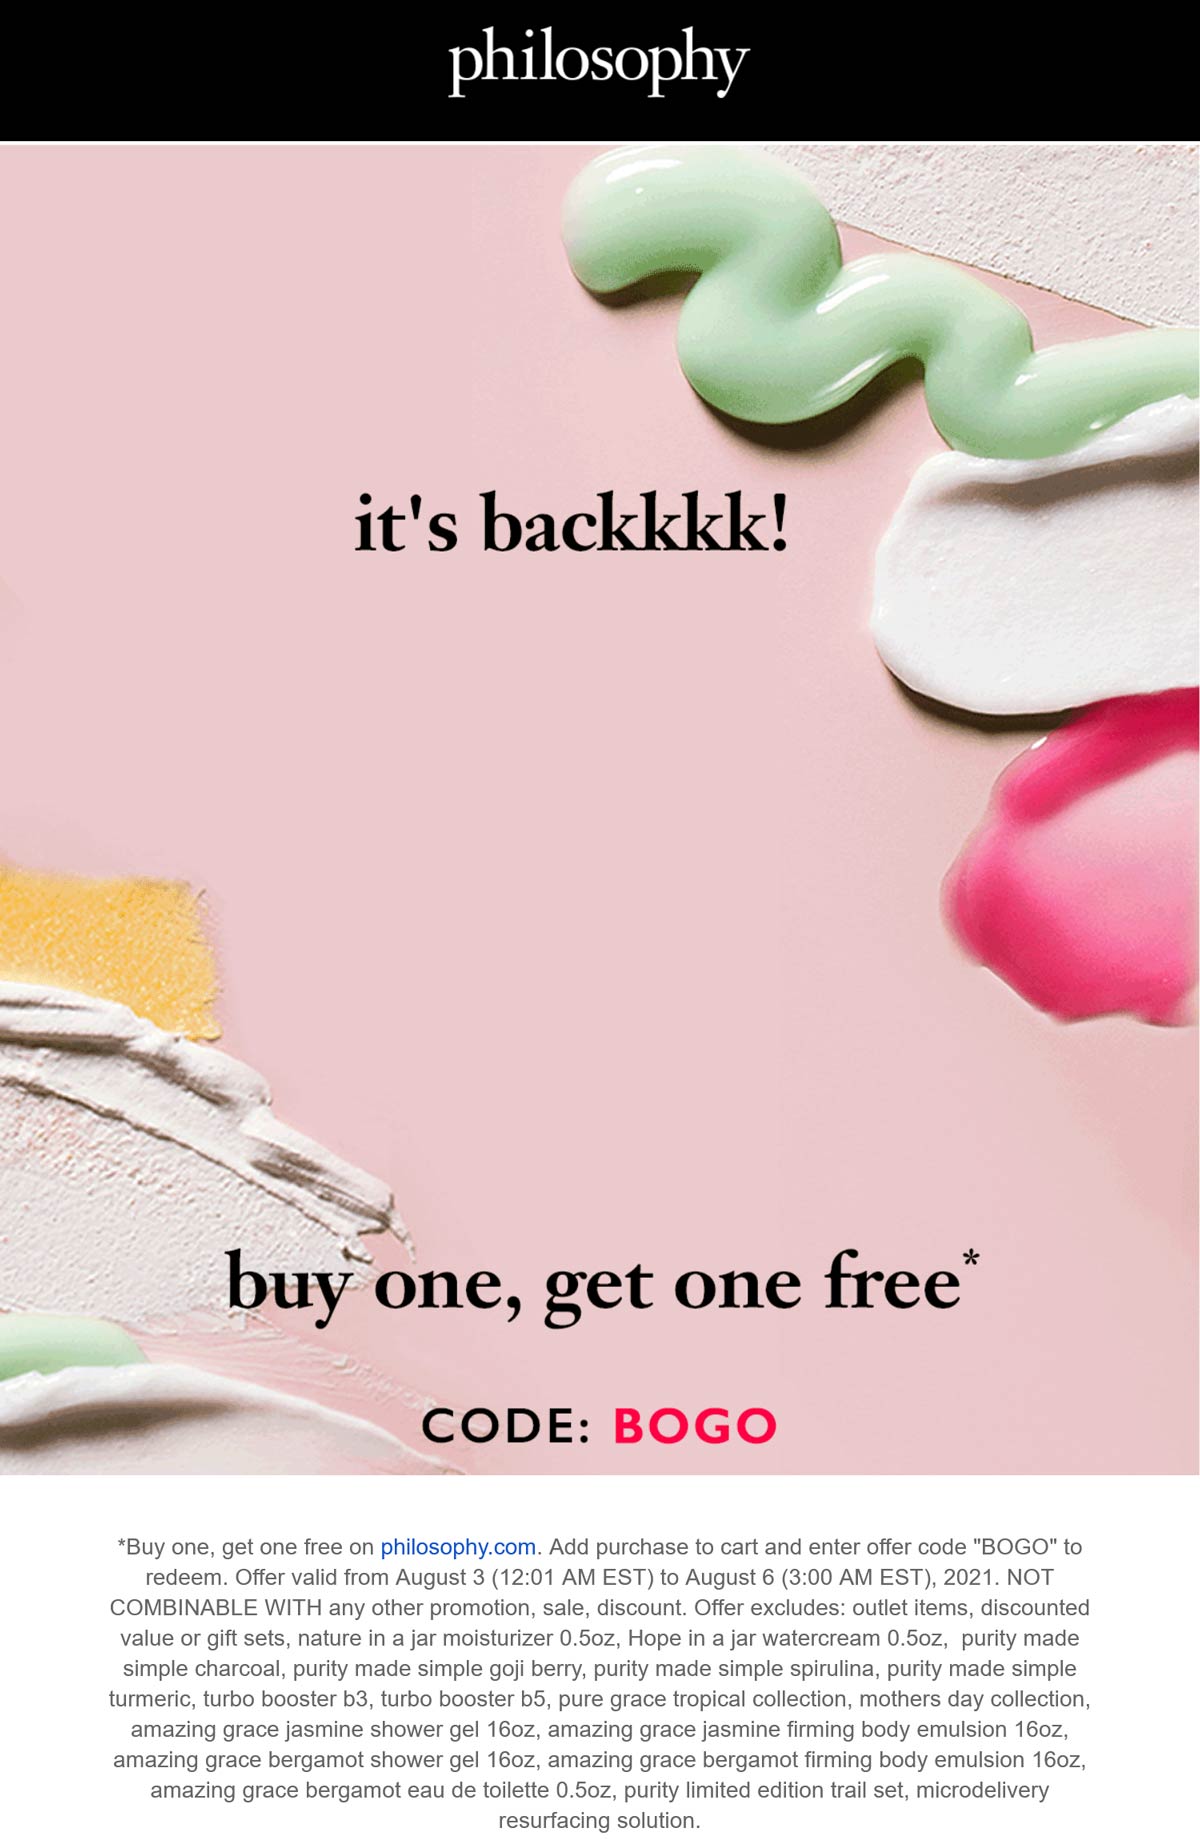 Philosophy stores Coupon  Second item free at Philosophy via promo code BOGO #philosophy 